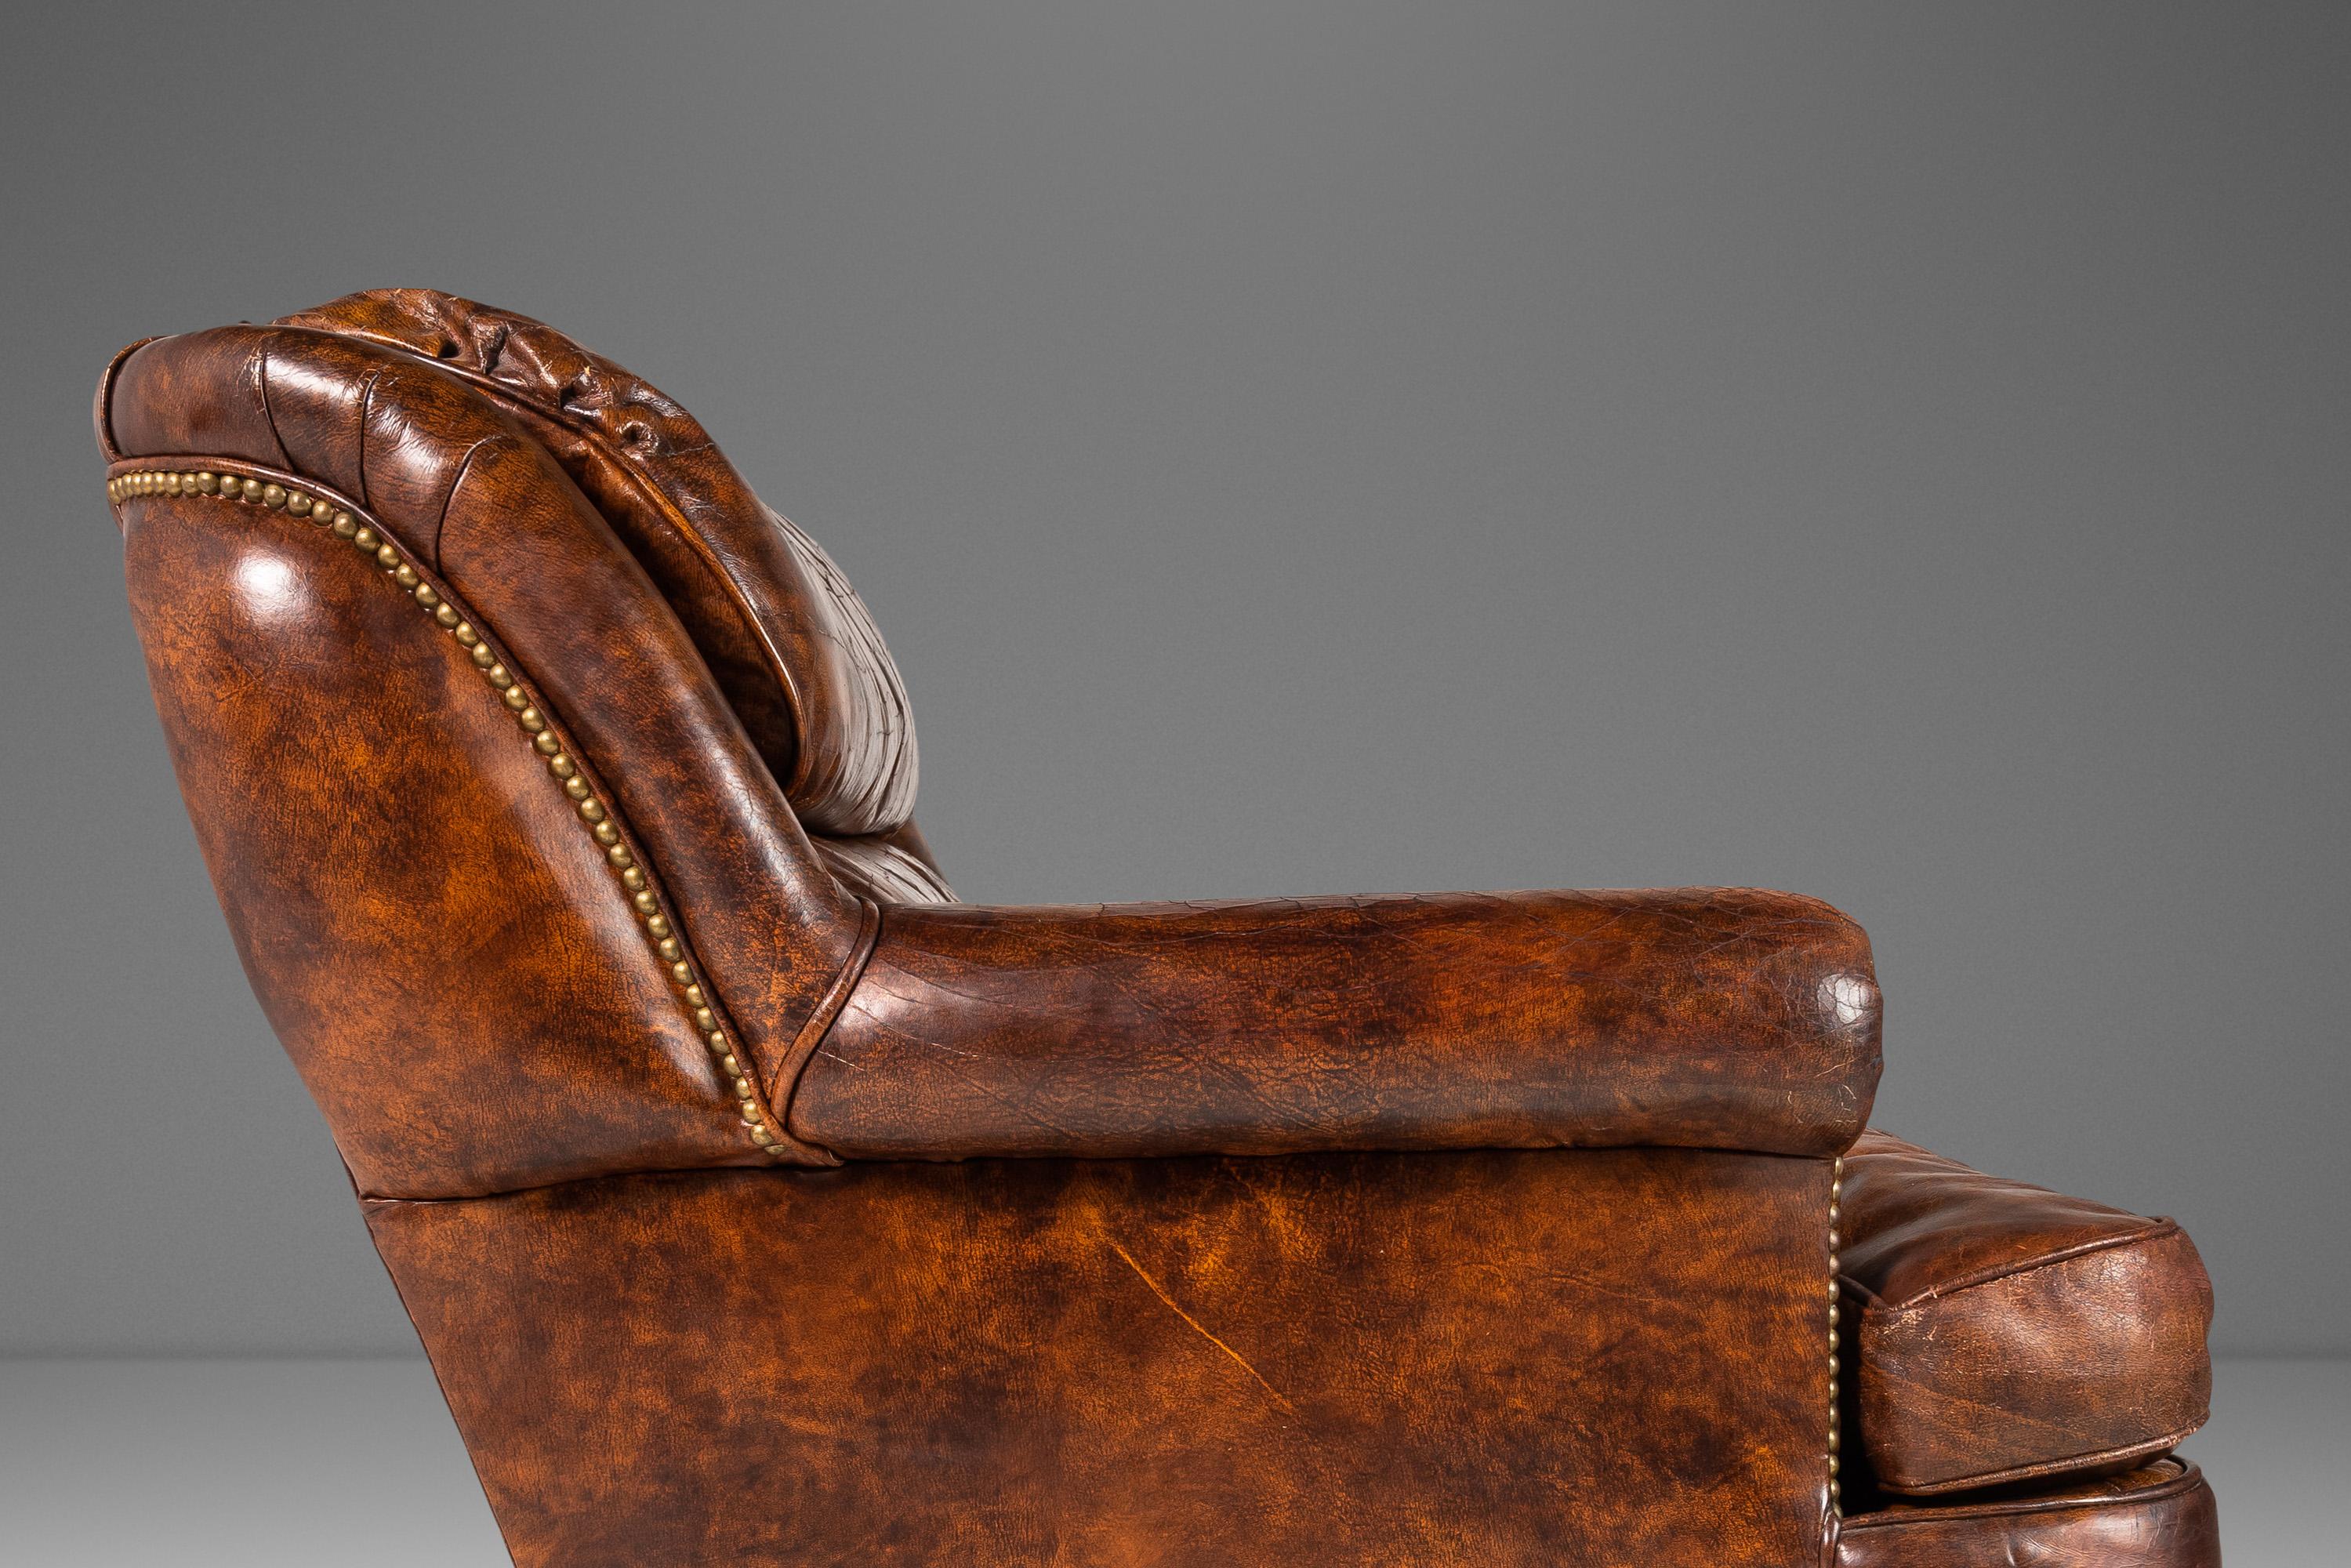 Patinaed French Club Chair Cigar Chair & Ottoman in Distressed Leather c. 1940s For Sale 11